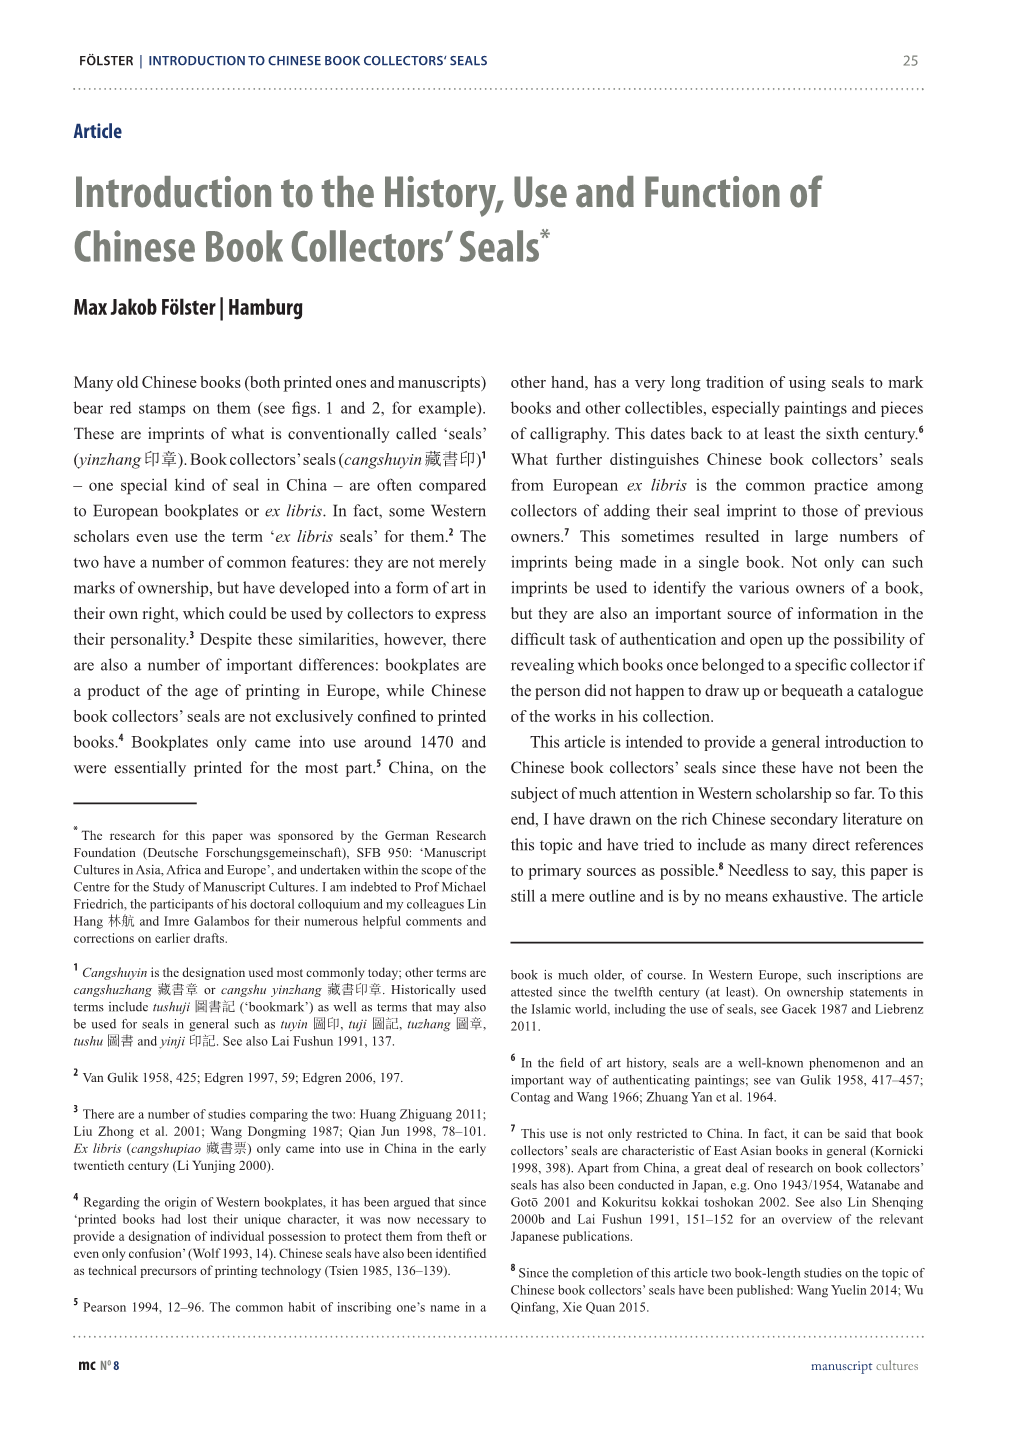 Introduction to the History, Use and Function of Chinese Book Collectors’ Seals*